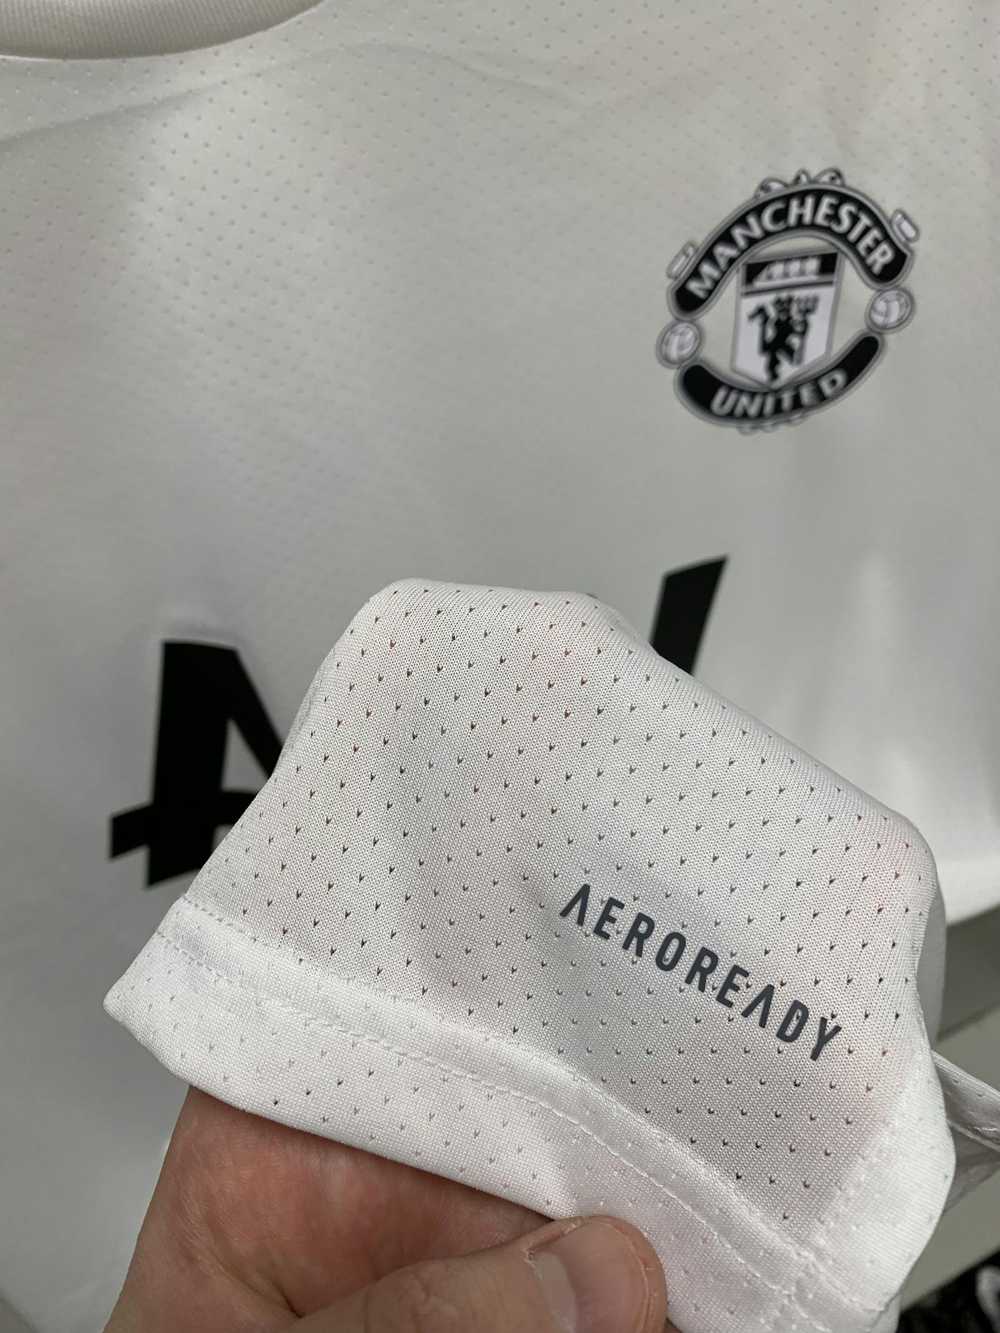 Adidas × Manchester United × Soccer Jersey Manche… - image 3